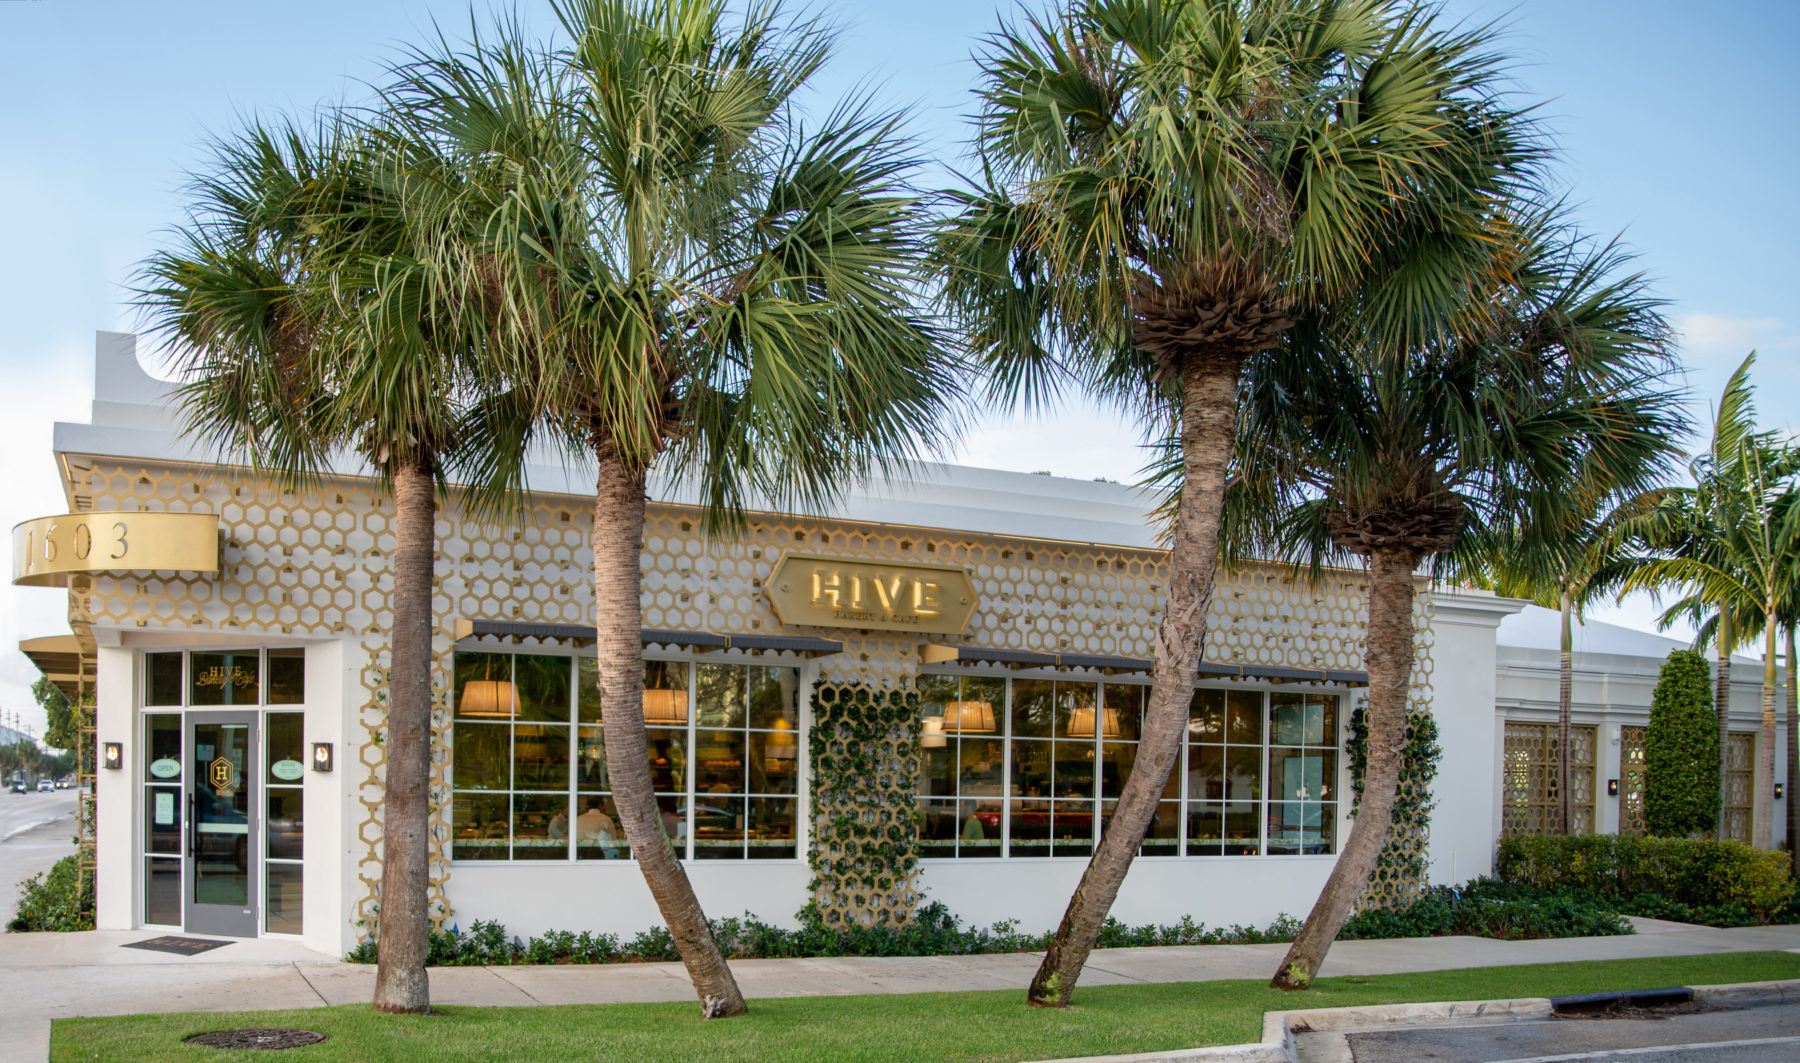 Image of Hive Bakery & Cafe Exterior Building with Gold Honeycomb Lattice and Palm Trees